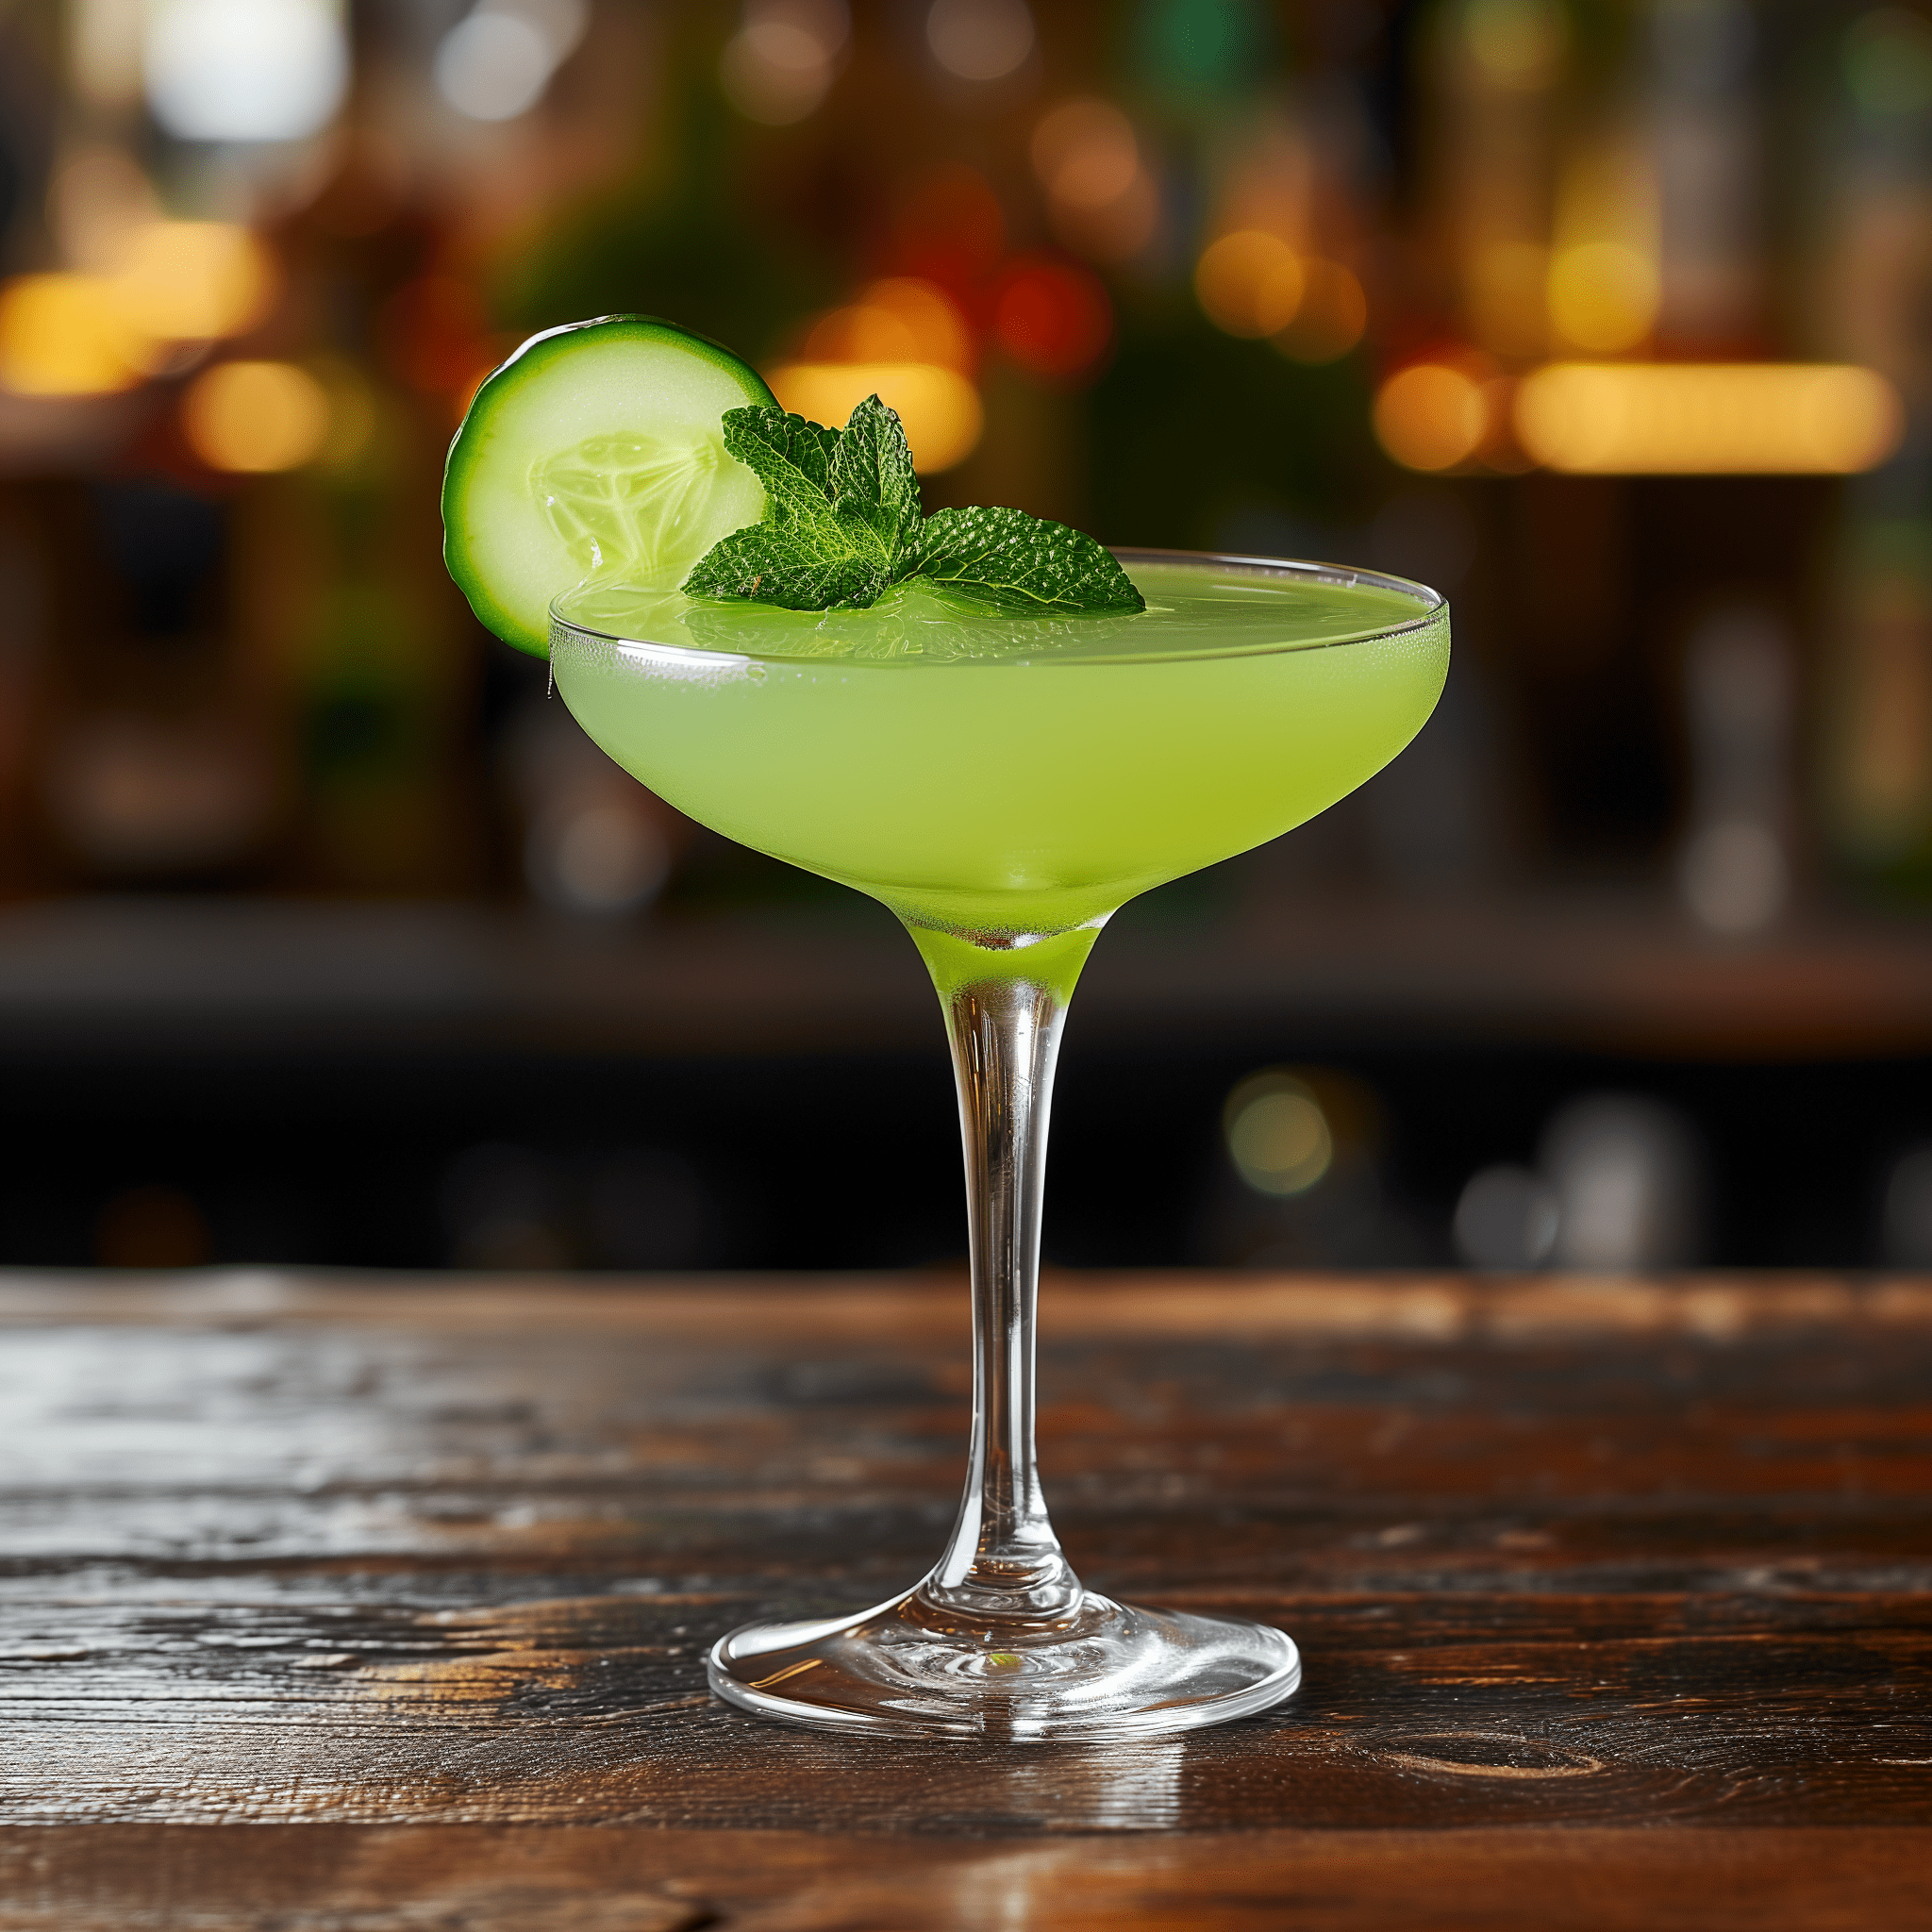 Old Maid Cocktail Recipe - The Old Maid offers a harmonious blend of botanical gin flavors with the crispness of fresh cucumber and the subtle sweetness of mint. It's a bright, zesty cocktail with a delicate balance between sweet and sour, and a clean finish that leaves you refreshed.